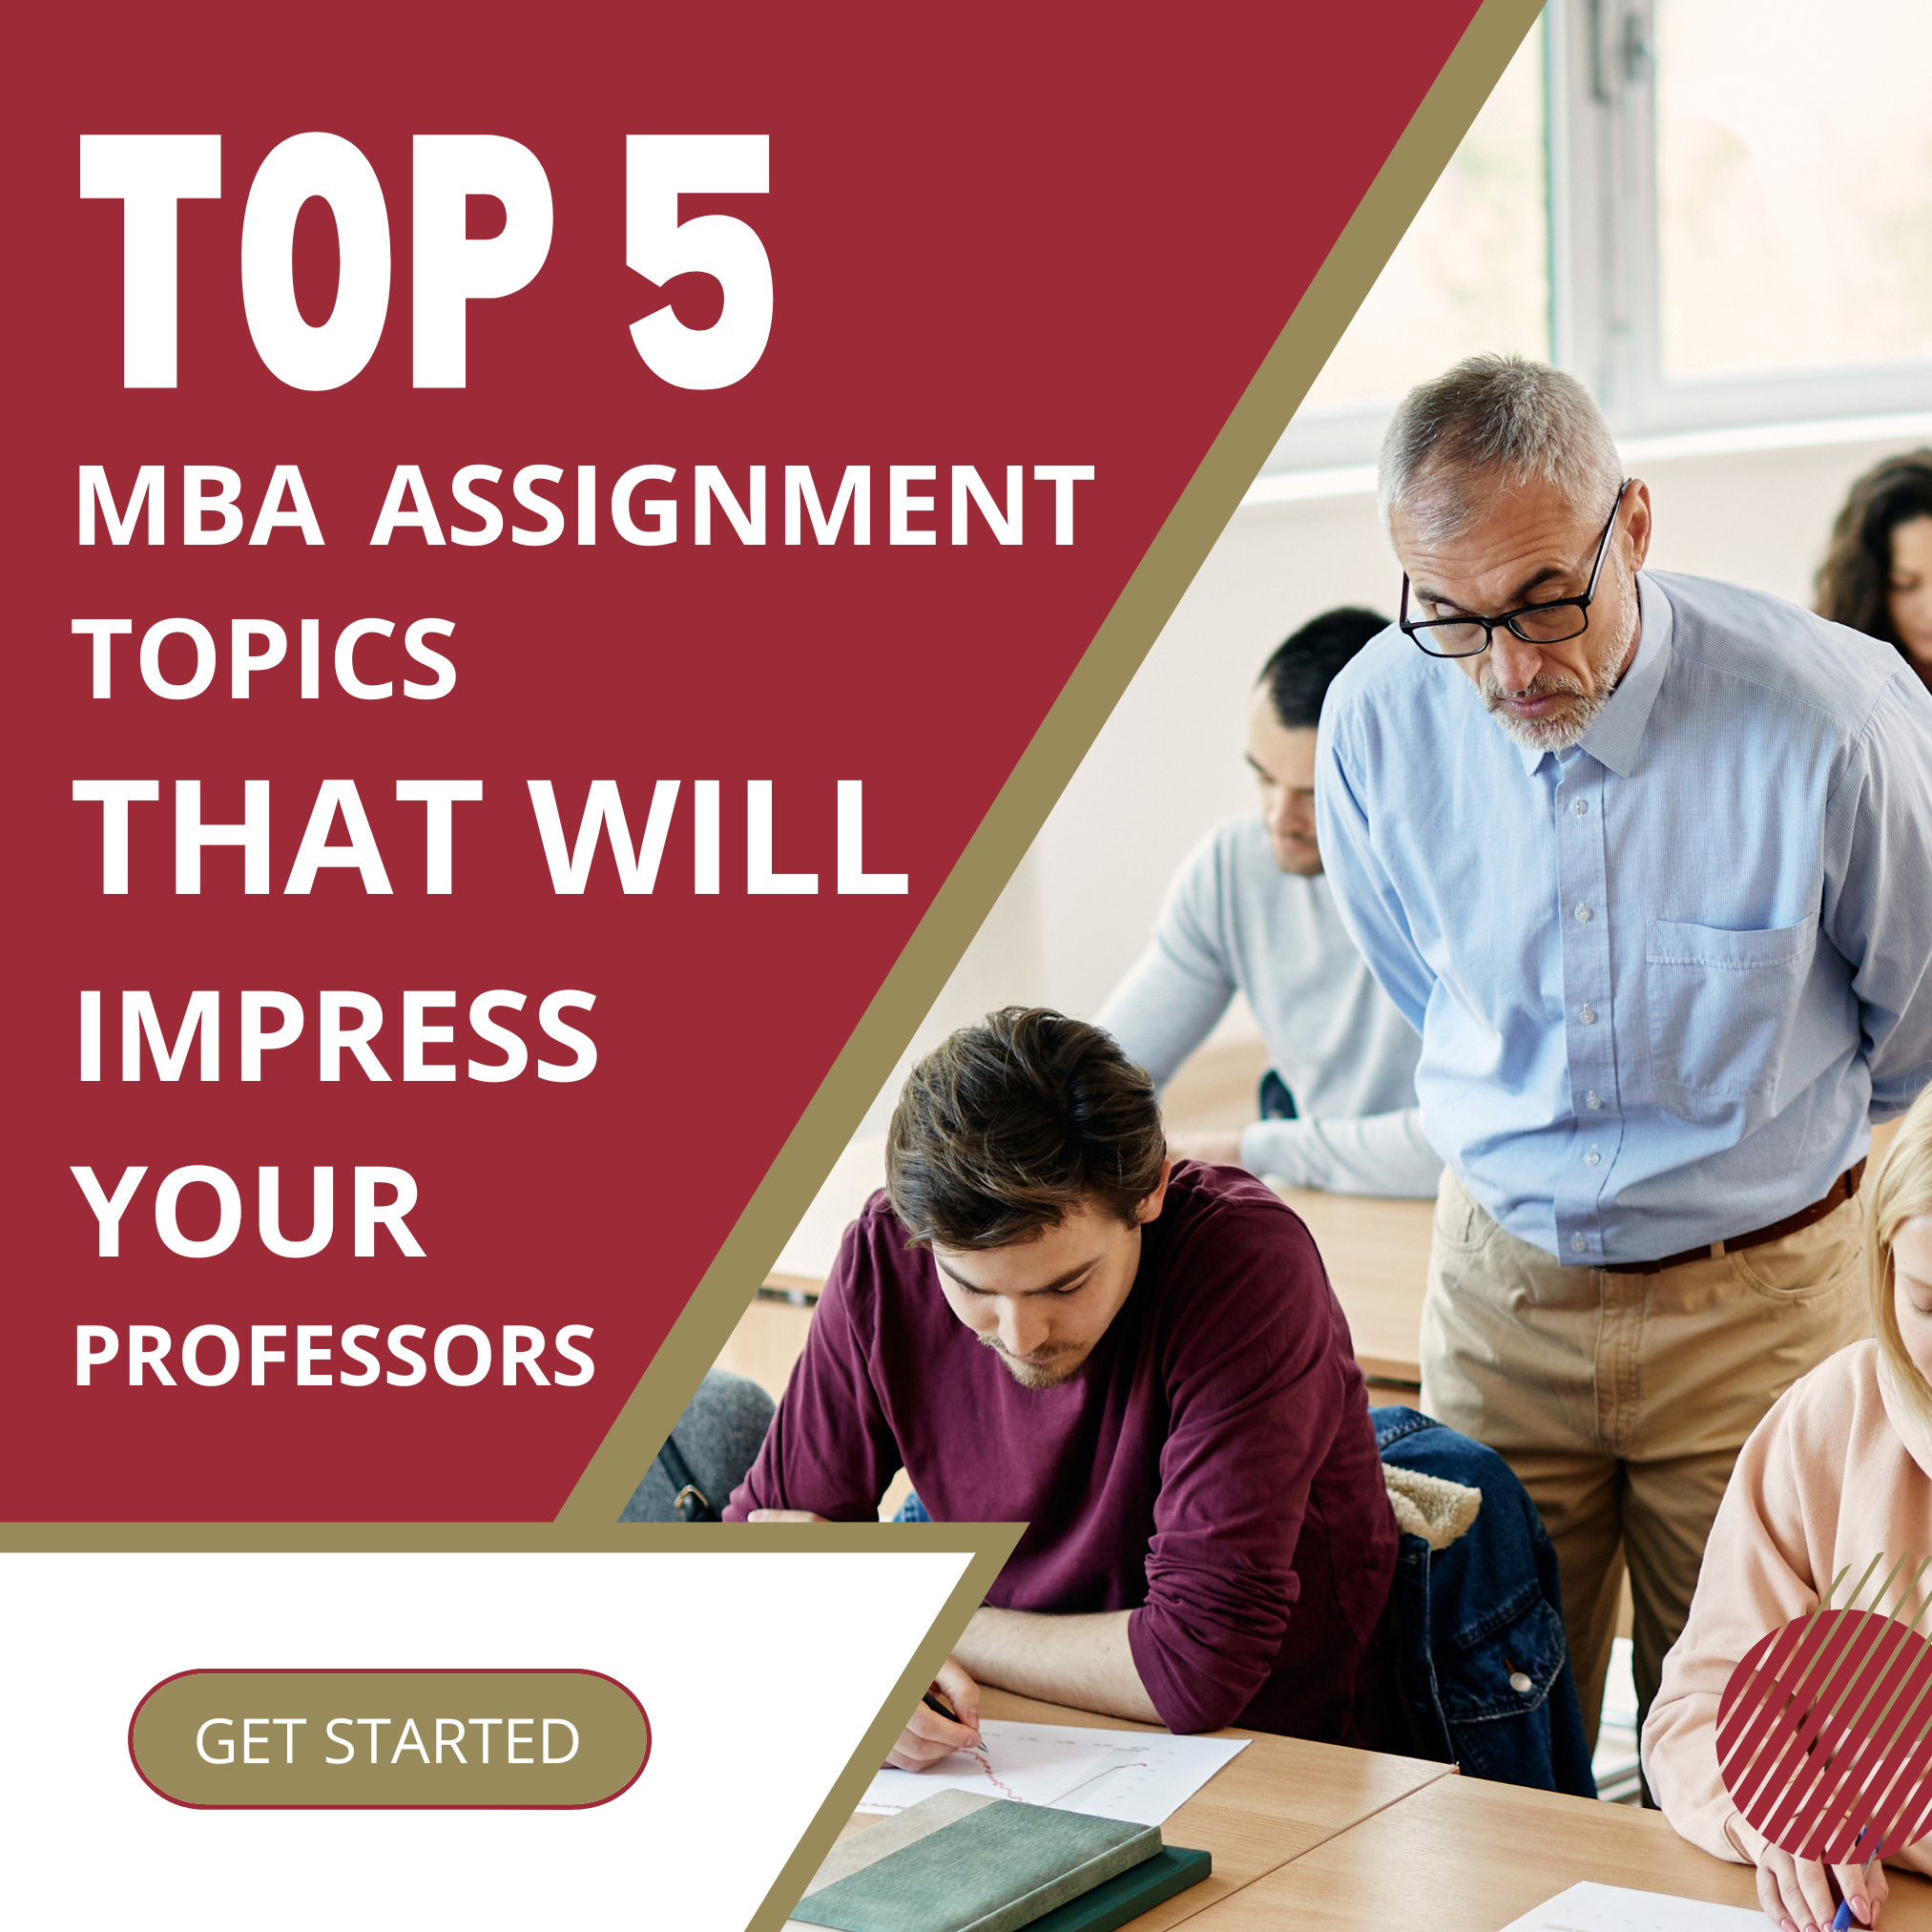 Top 5 MBA Assignment Topics That Will Impress Your Professors